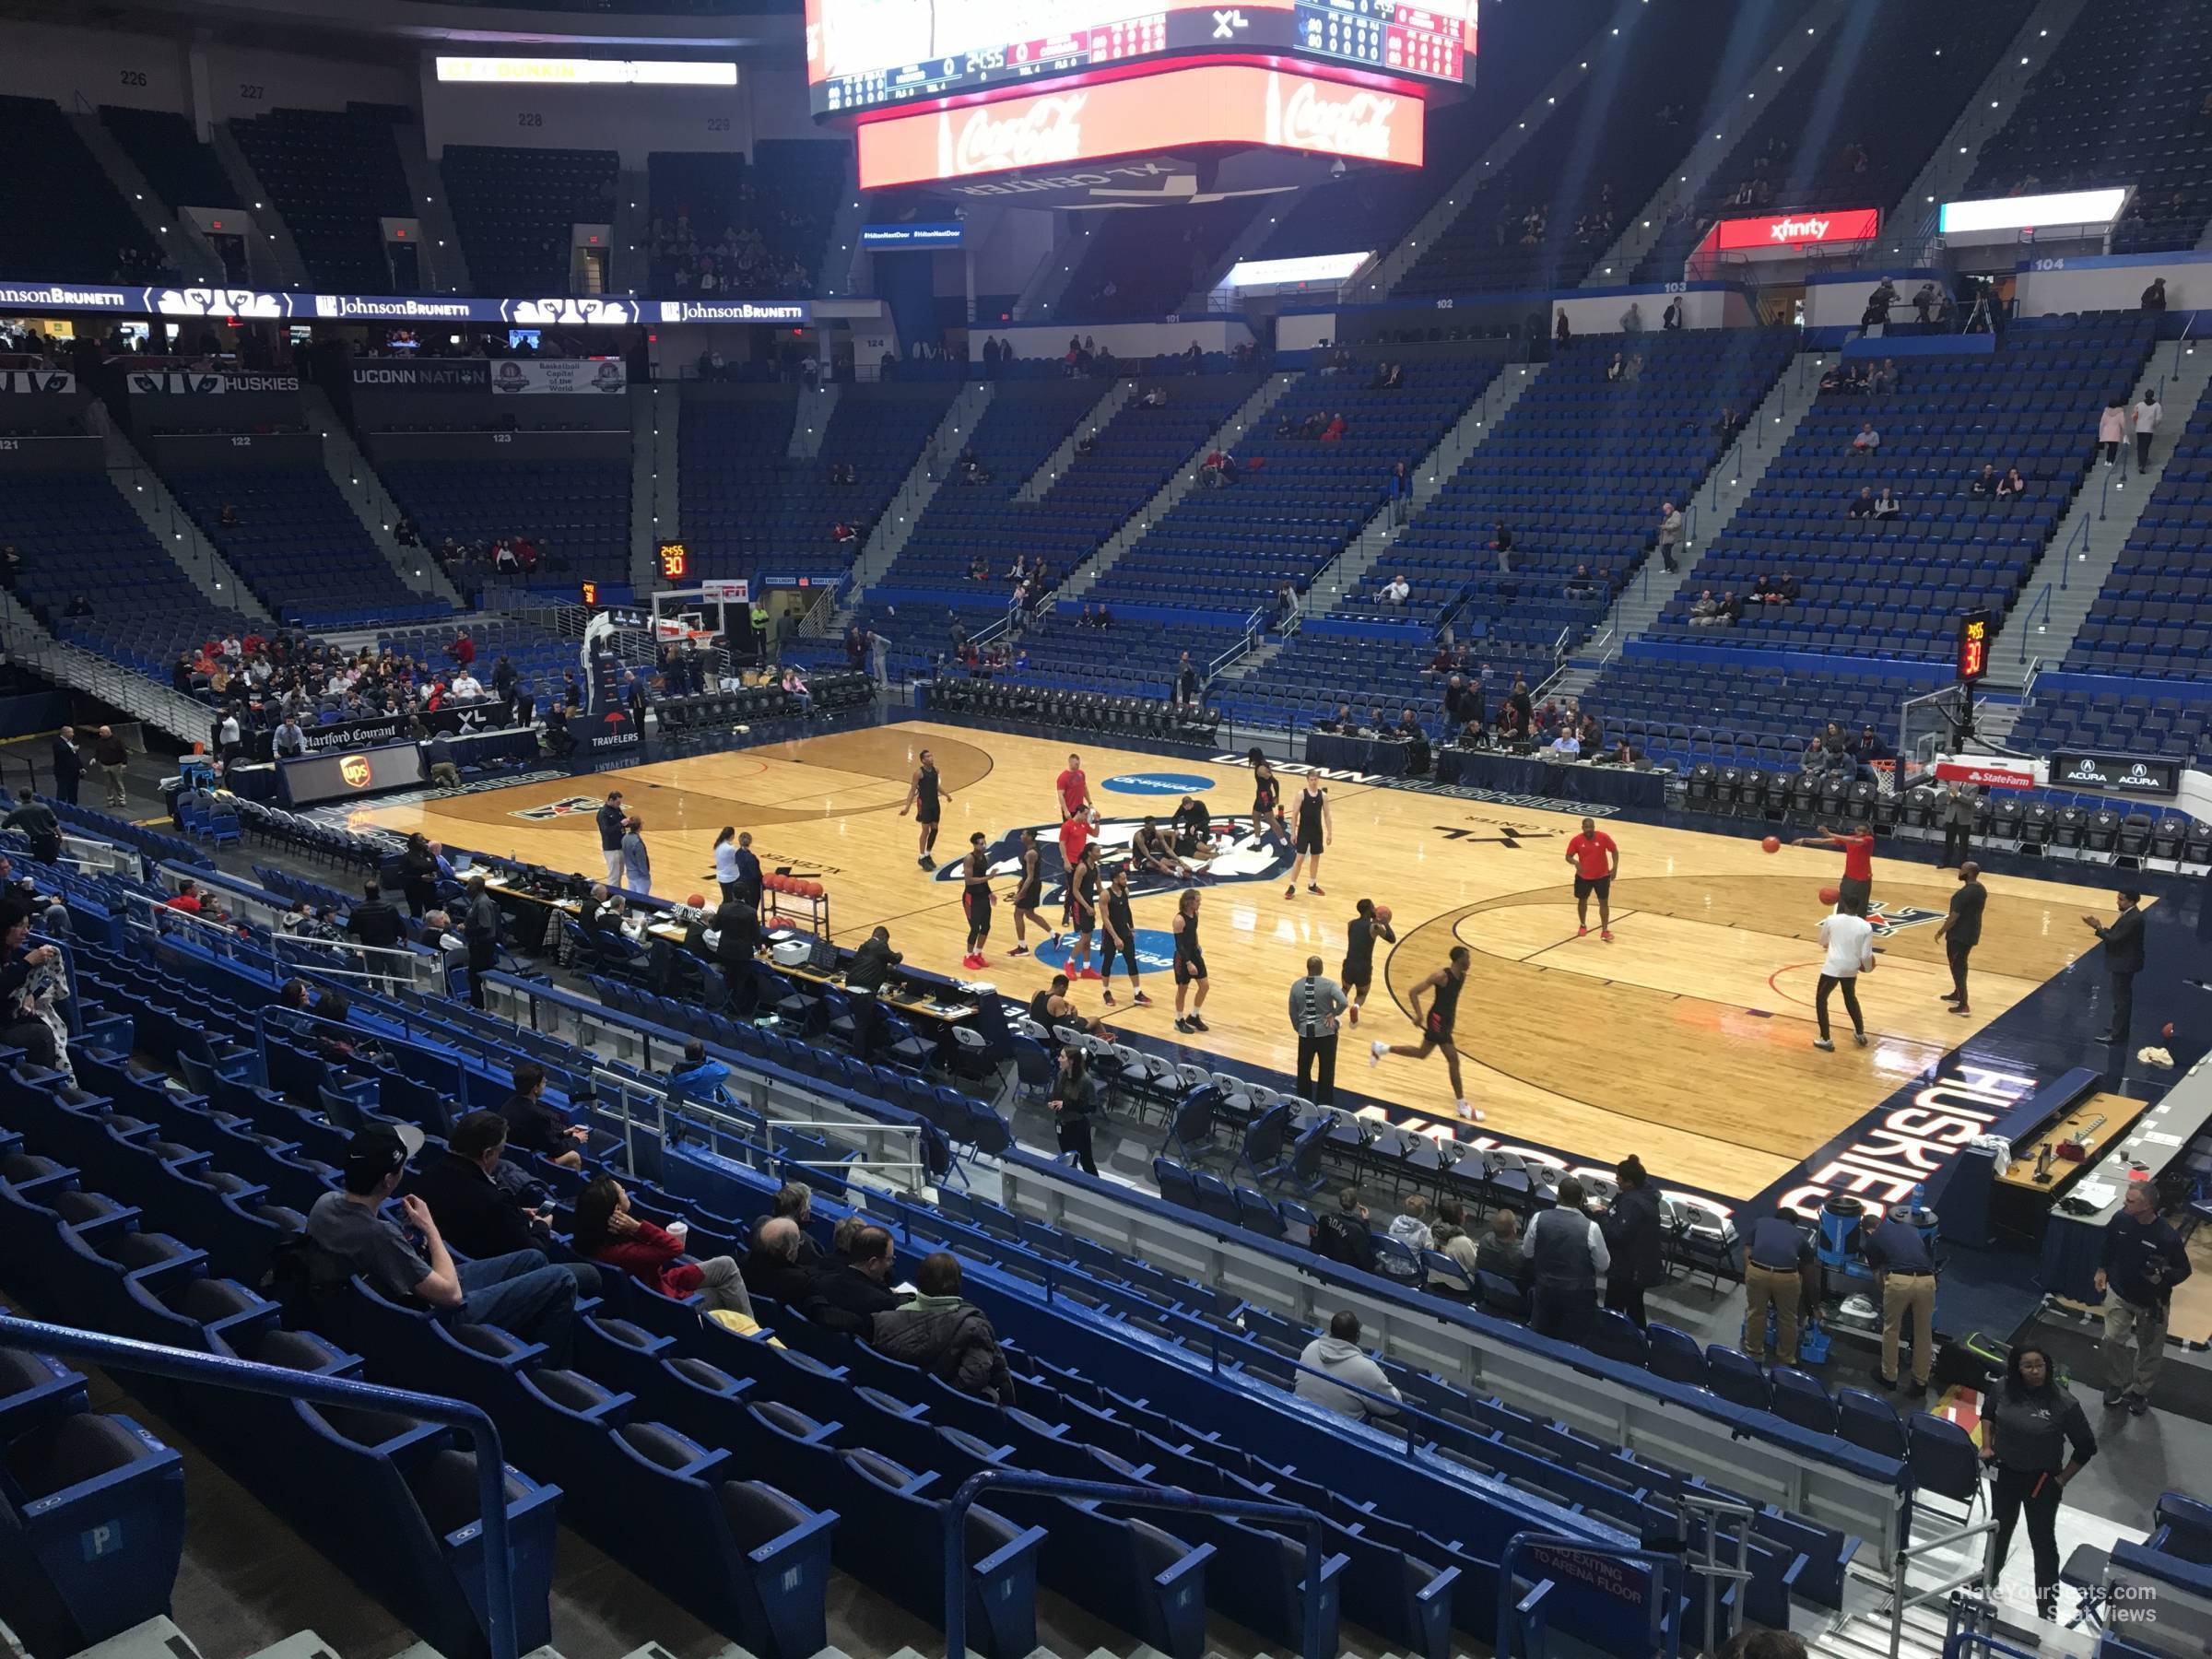 XL Center Section 113 - RateYourSeats.com